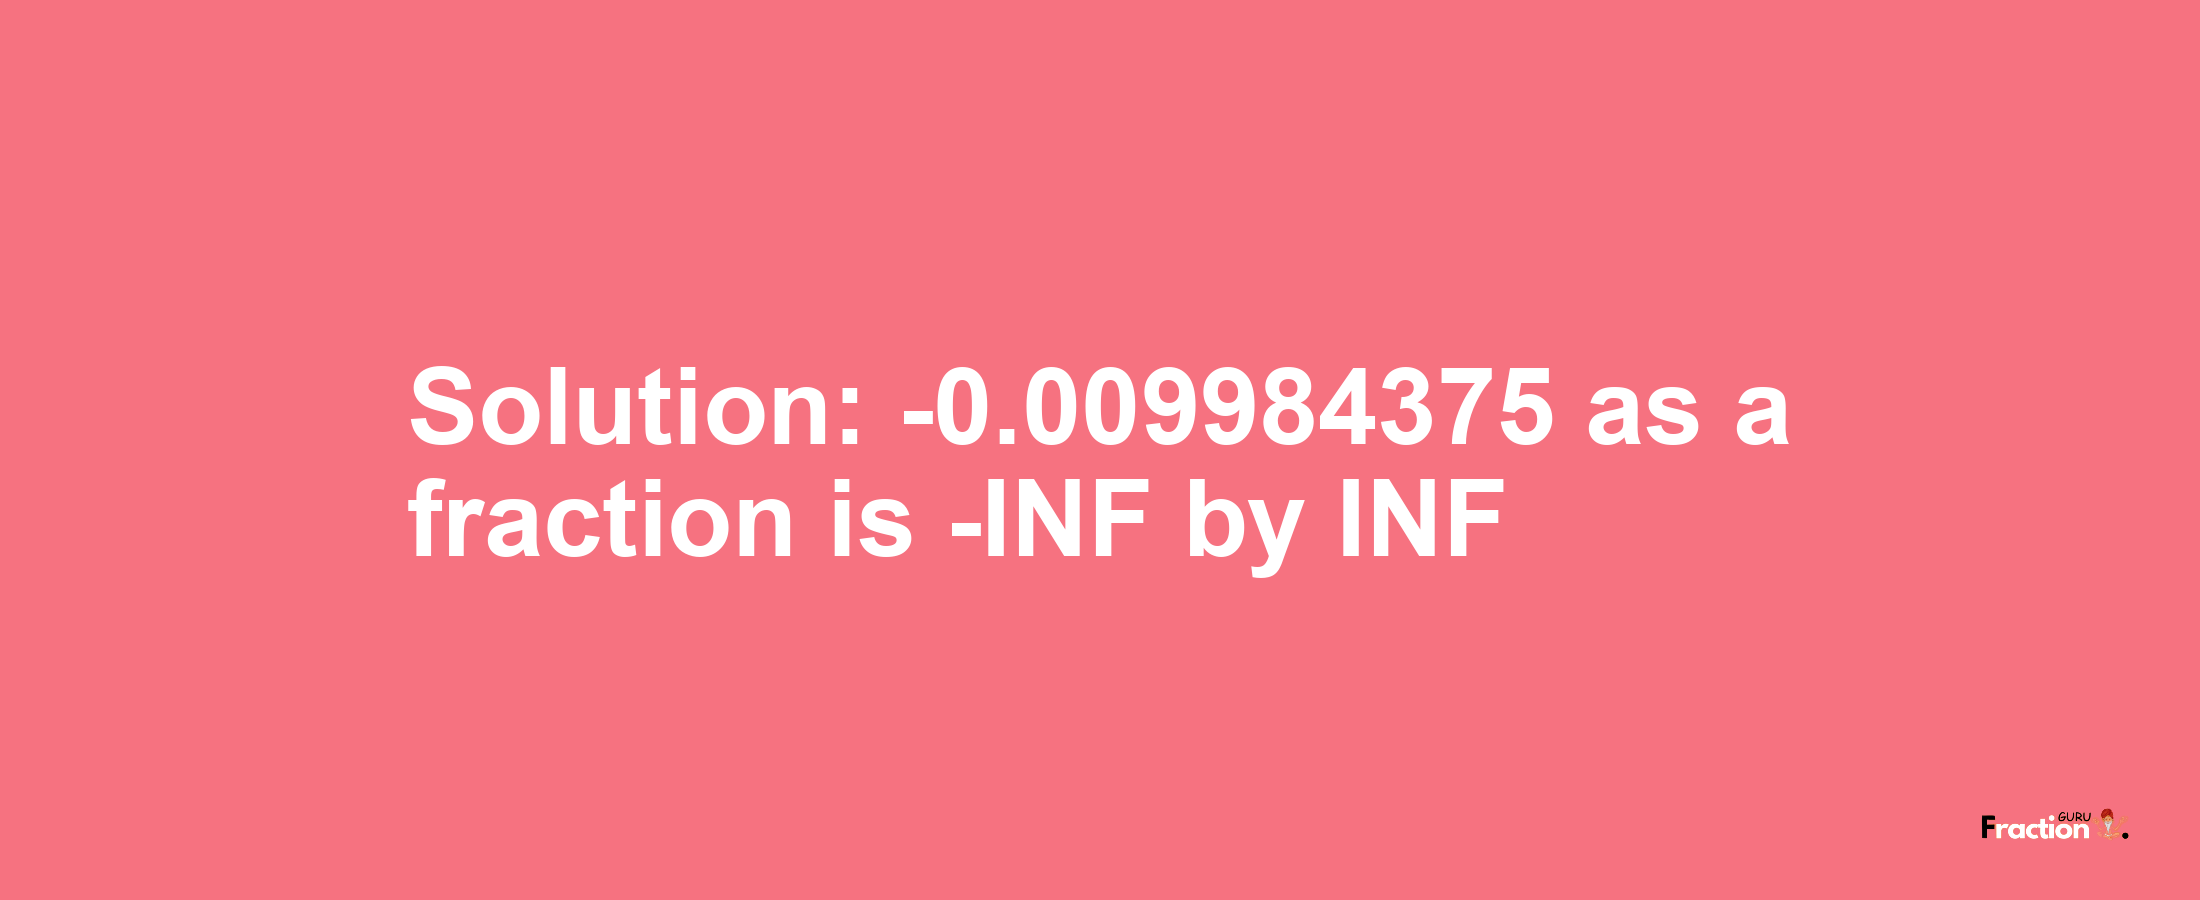 Solution:-0.009984375 as a fraction is -INF/INF